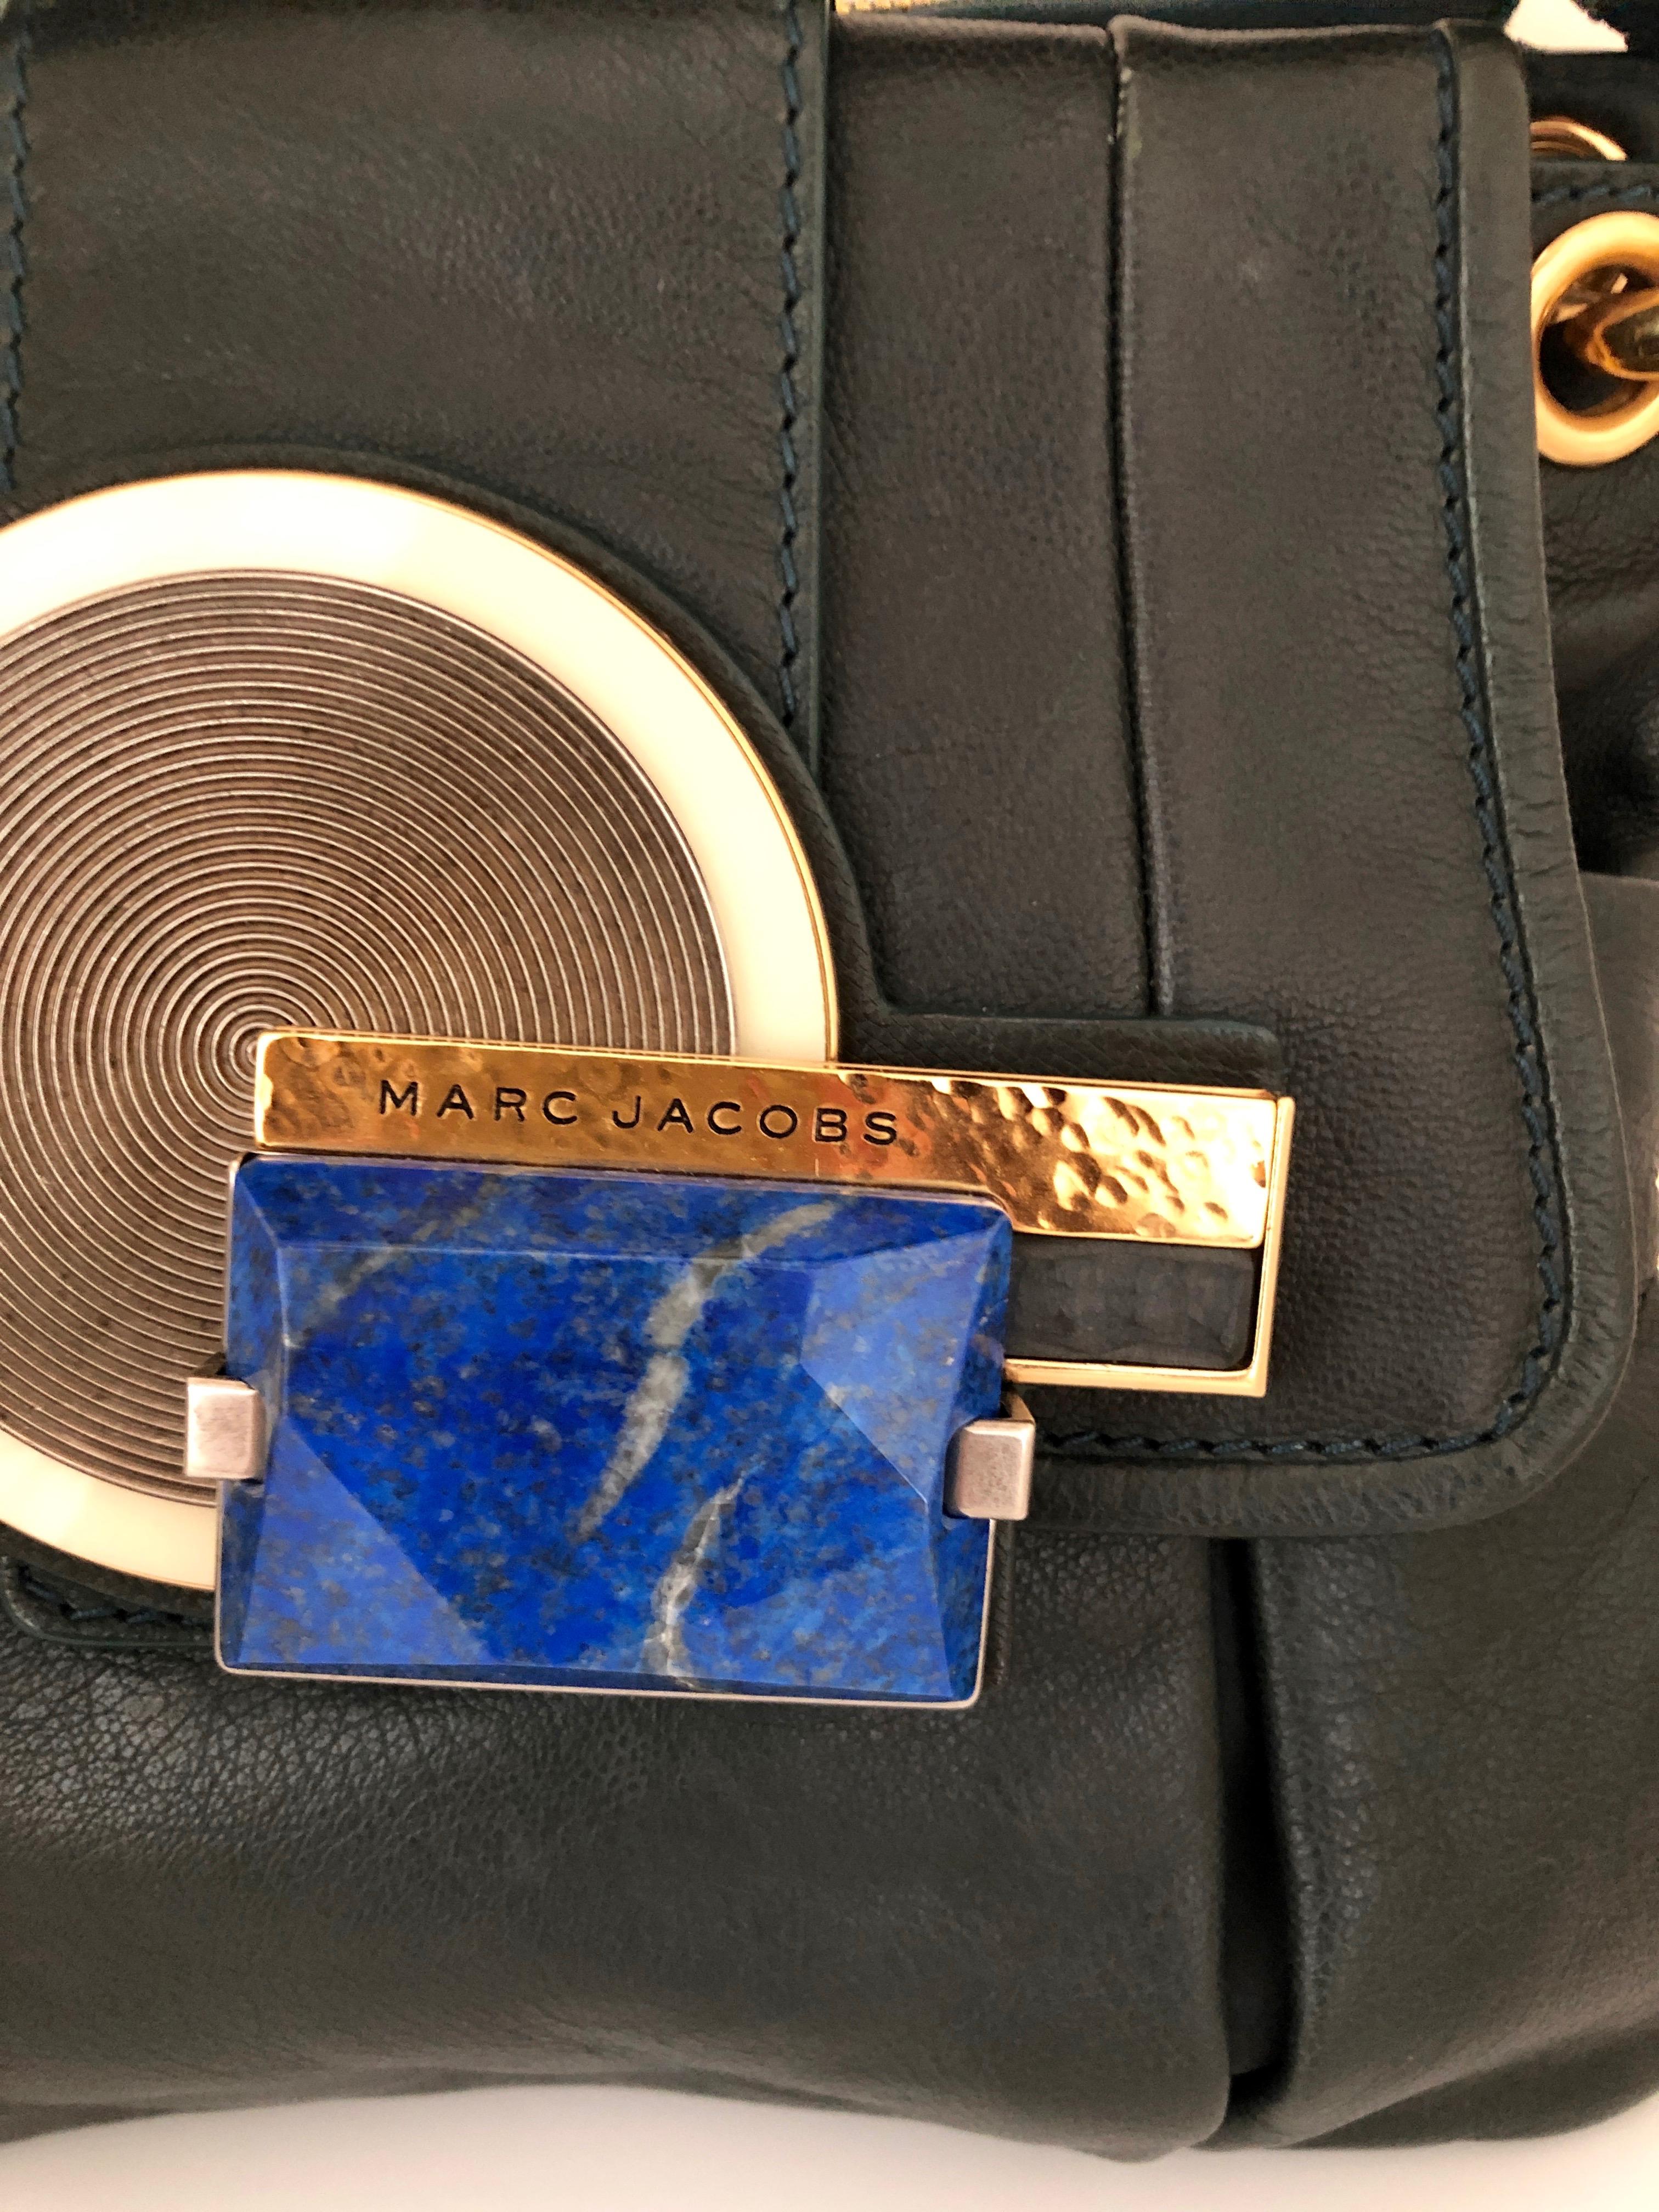 Make:  Marc Jacobs
Place of Manufacture:  Italy
Materials:  Leather, metal and lapis
Color:  Hunter green, gold and lapis blue
Style:  Hunter green ruff hewn leather Paloma double saddlebag with top handle and gold metal accents.  The closure is of